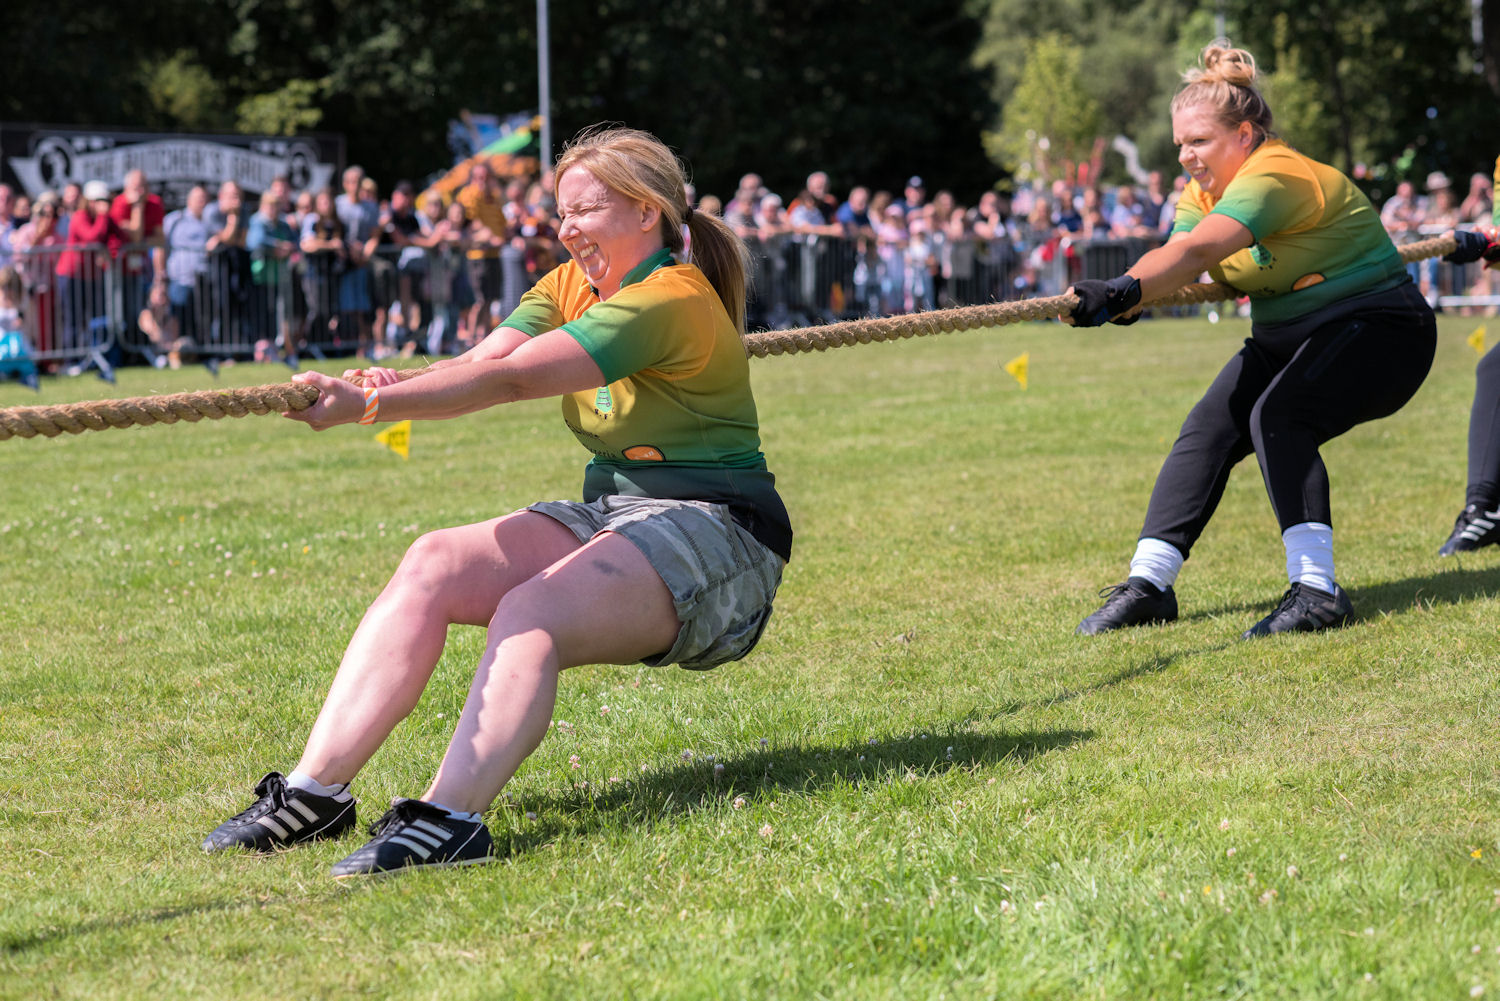 image of Highland Games 2 women in tug of war